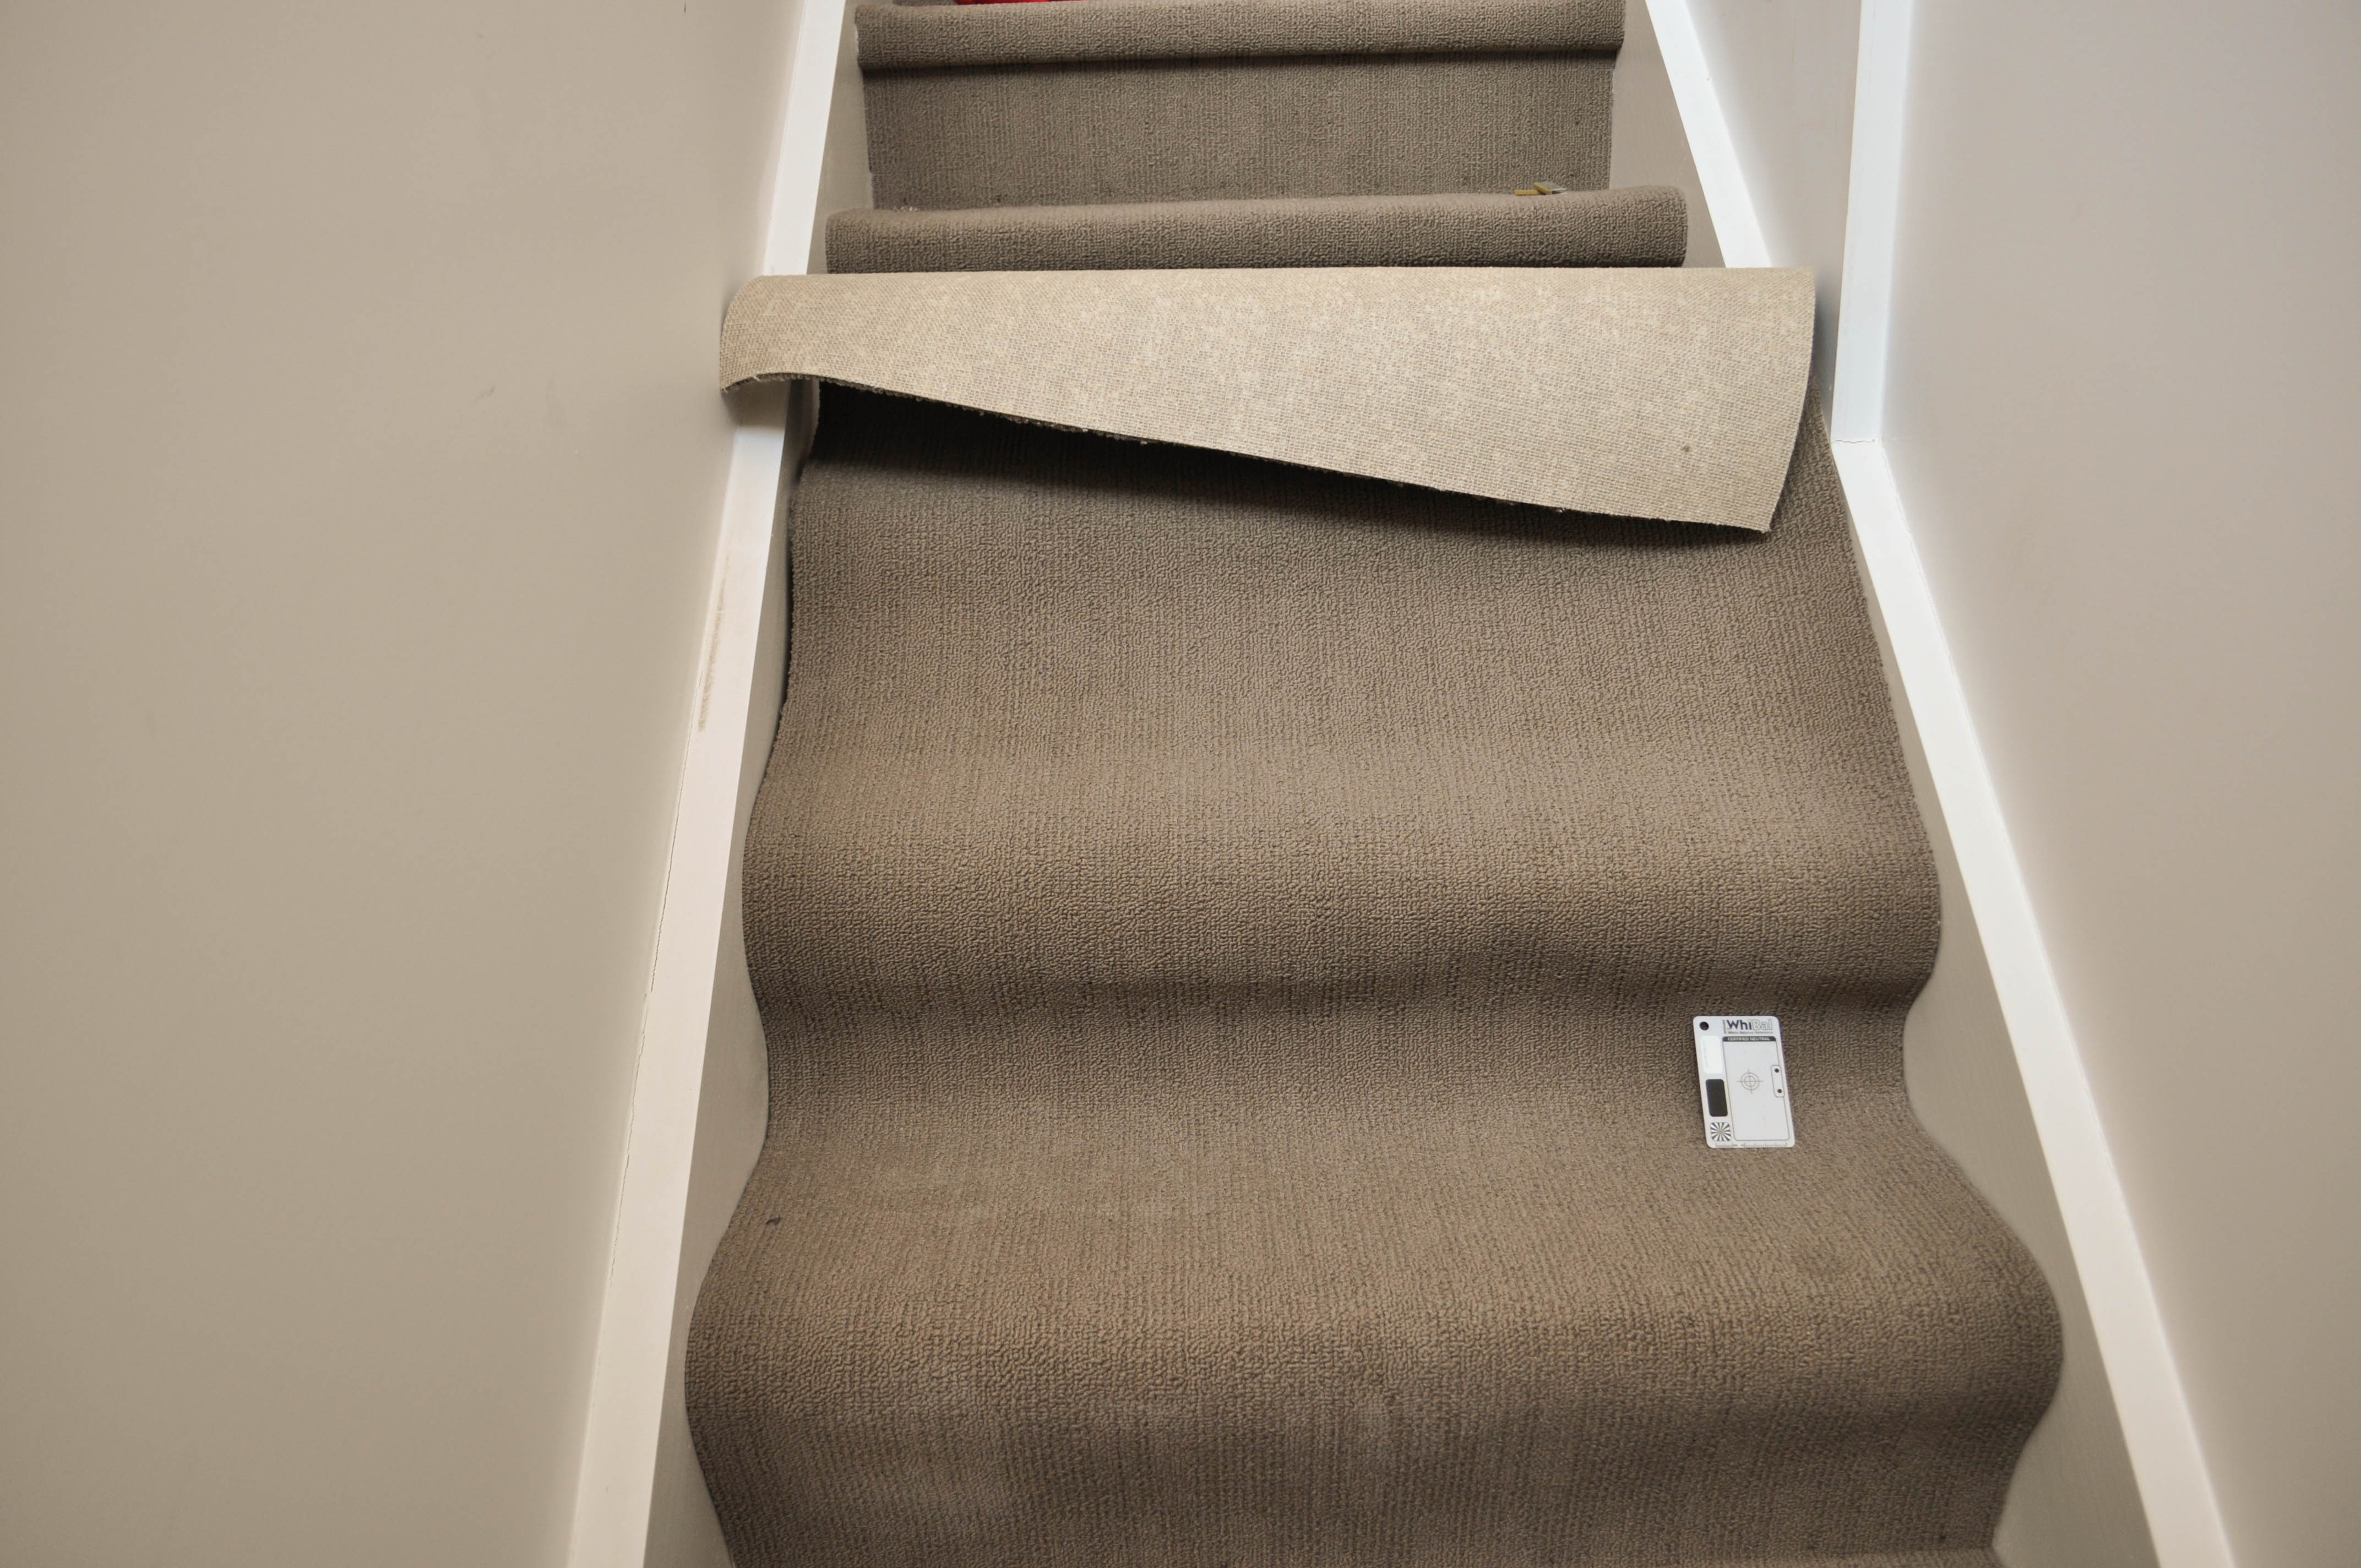 The slab of carpet that has been cut to size and positioned on the staircase and bottomed has been
  stapled with an electric tacker to stay permanently in place.